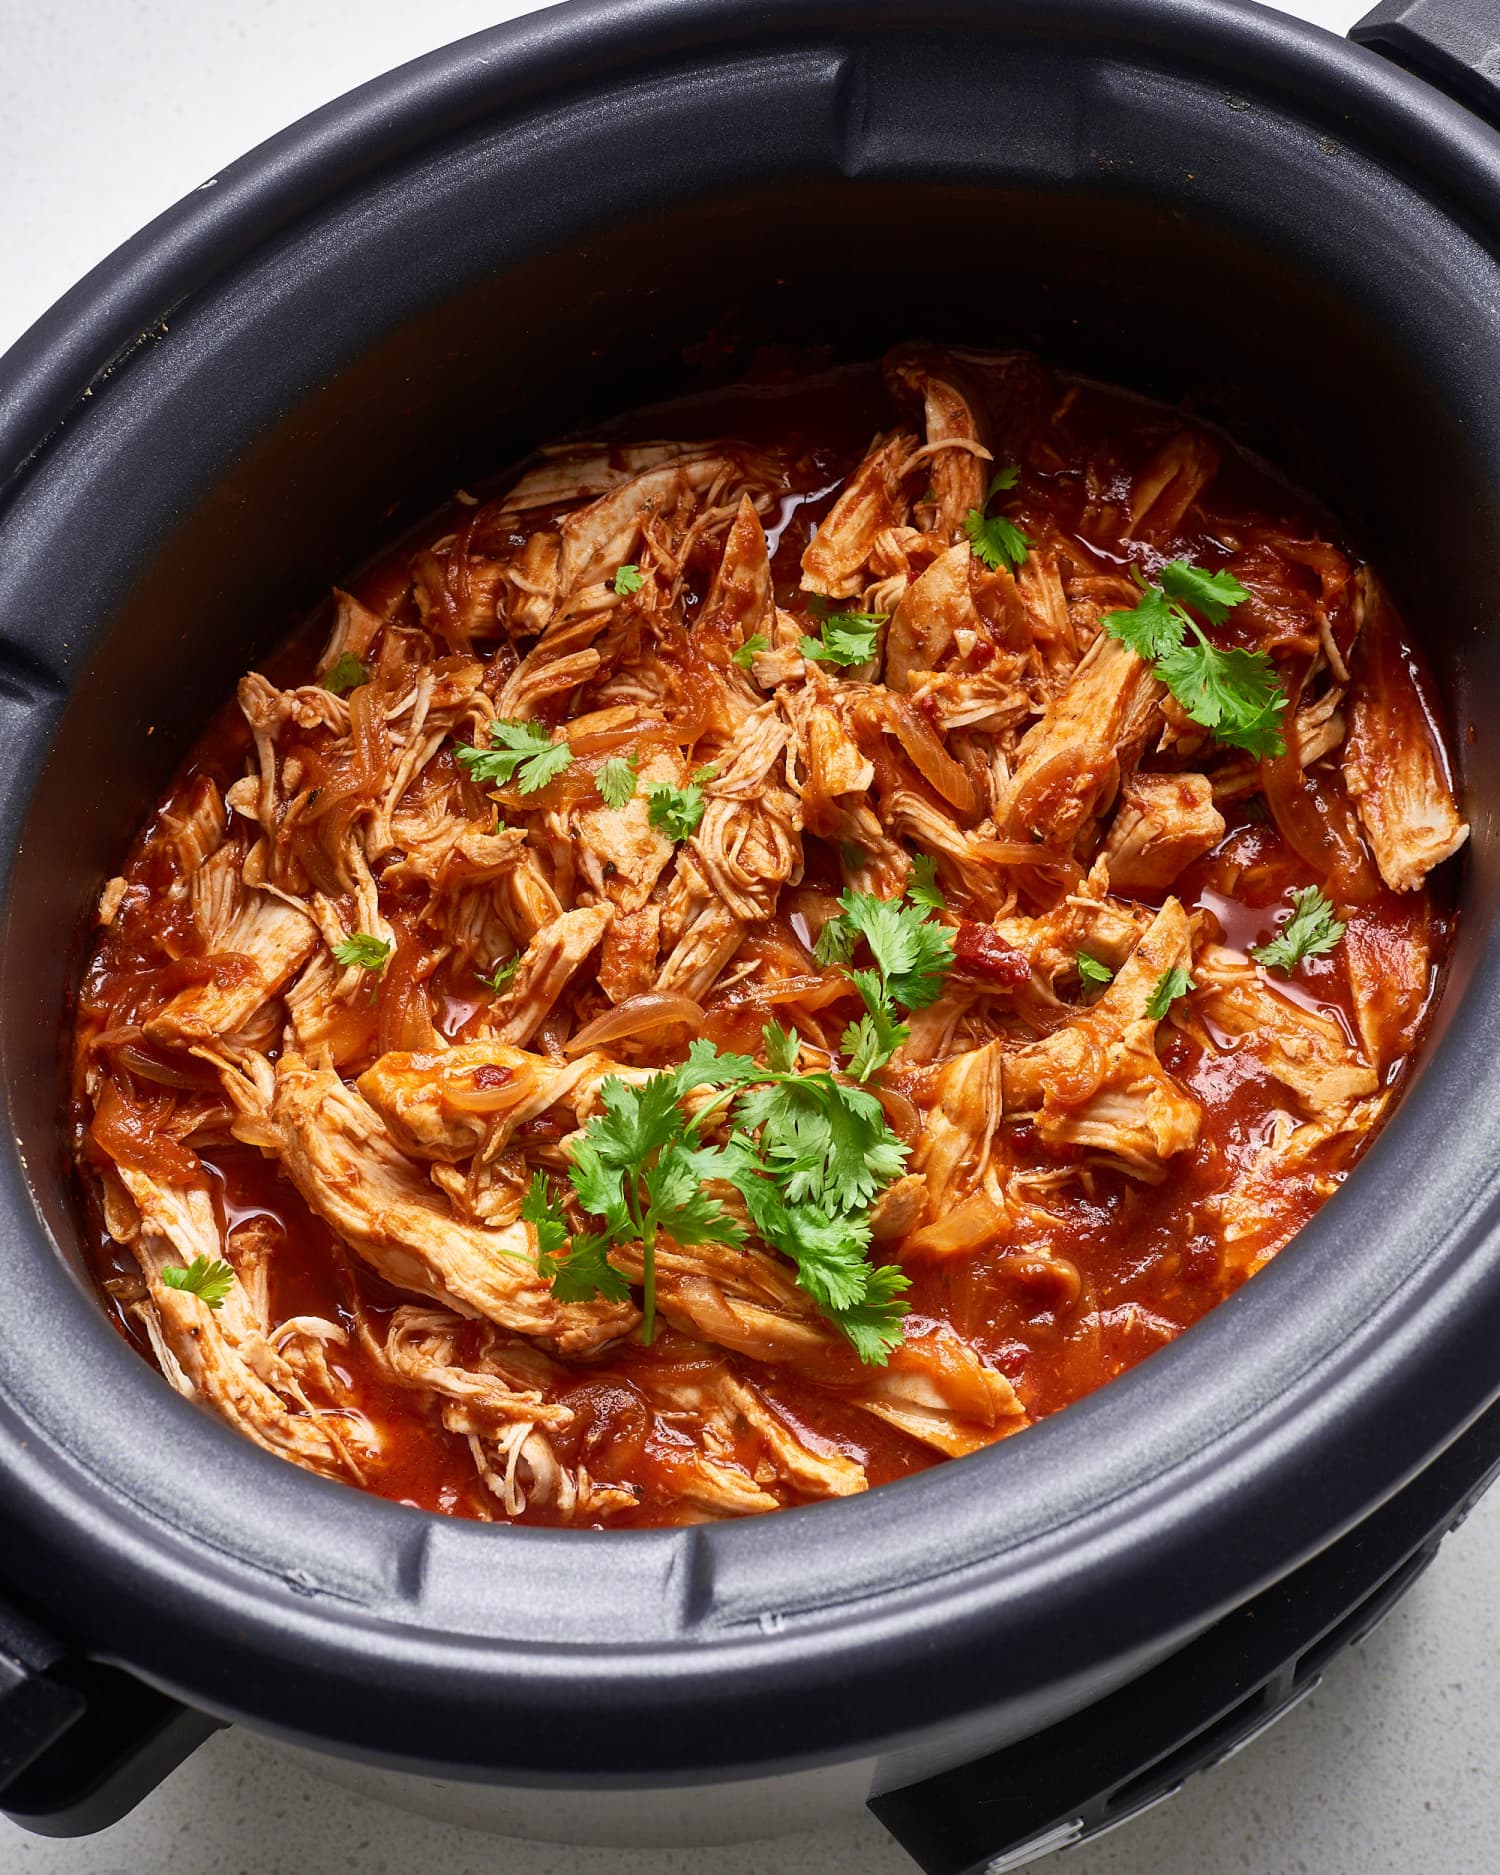 35 Easy Slow Cooker Chicken Recipes for Weeknights